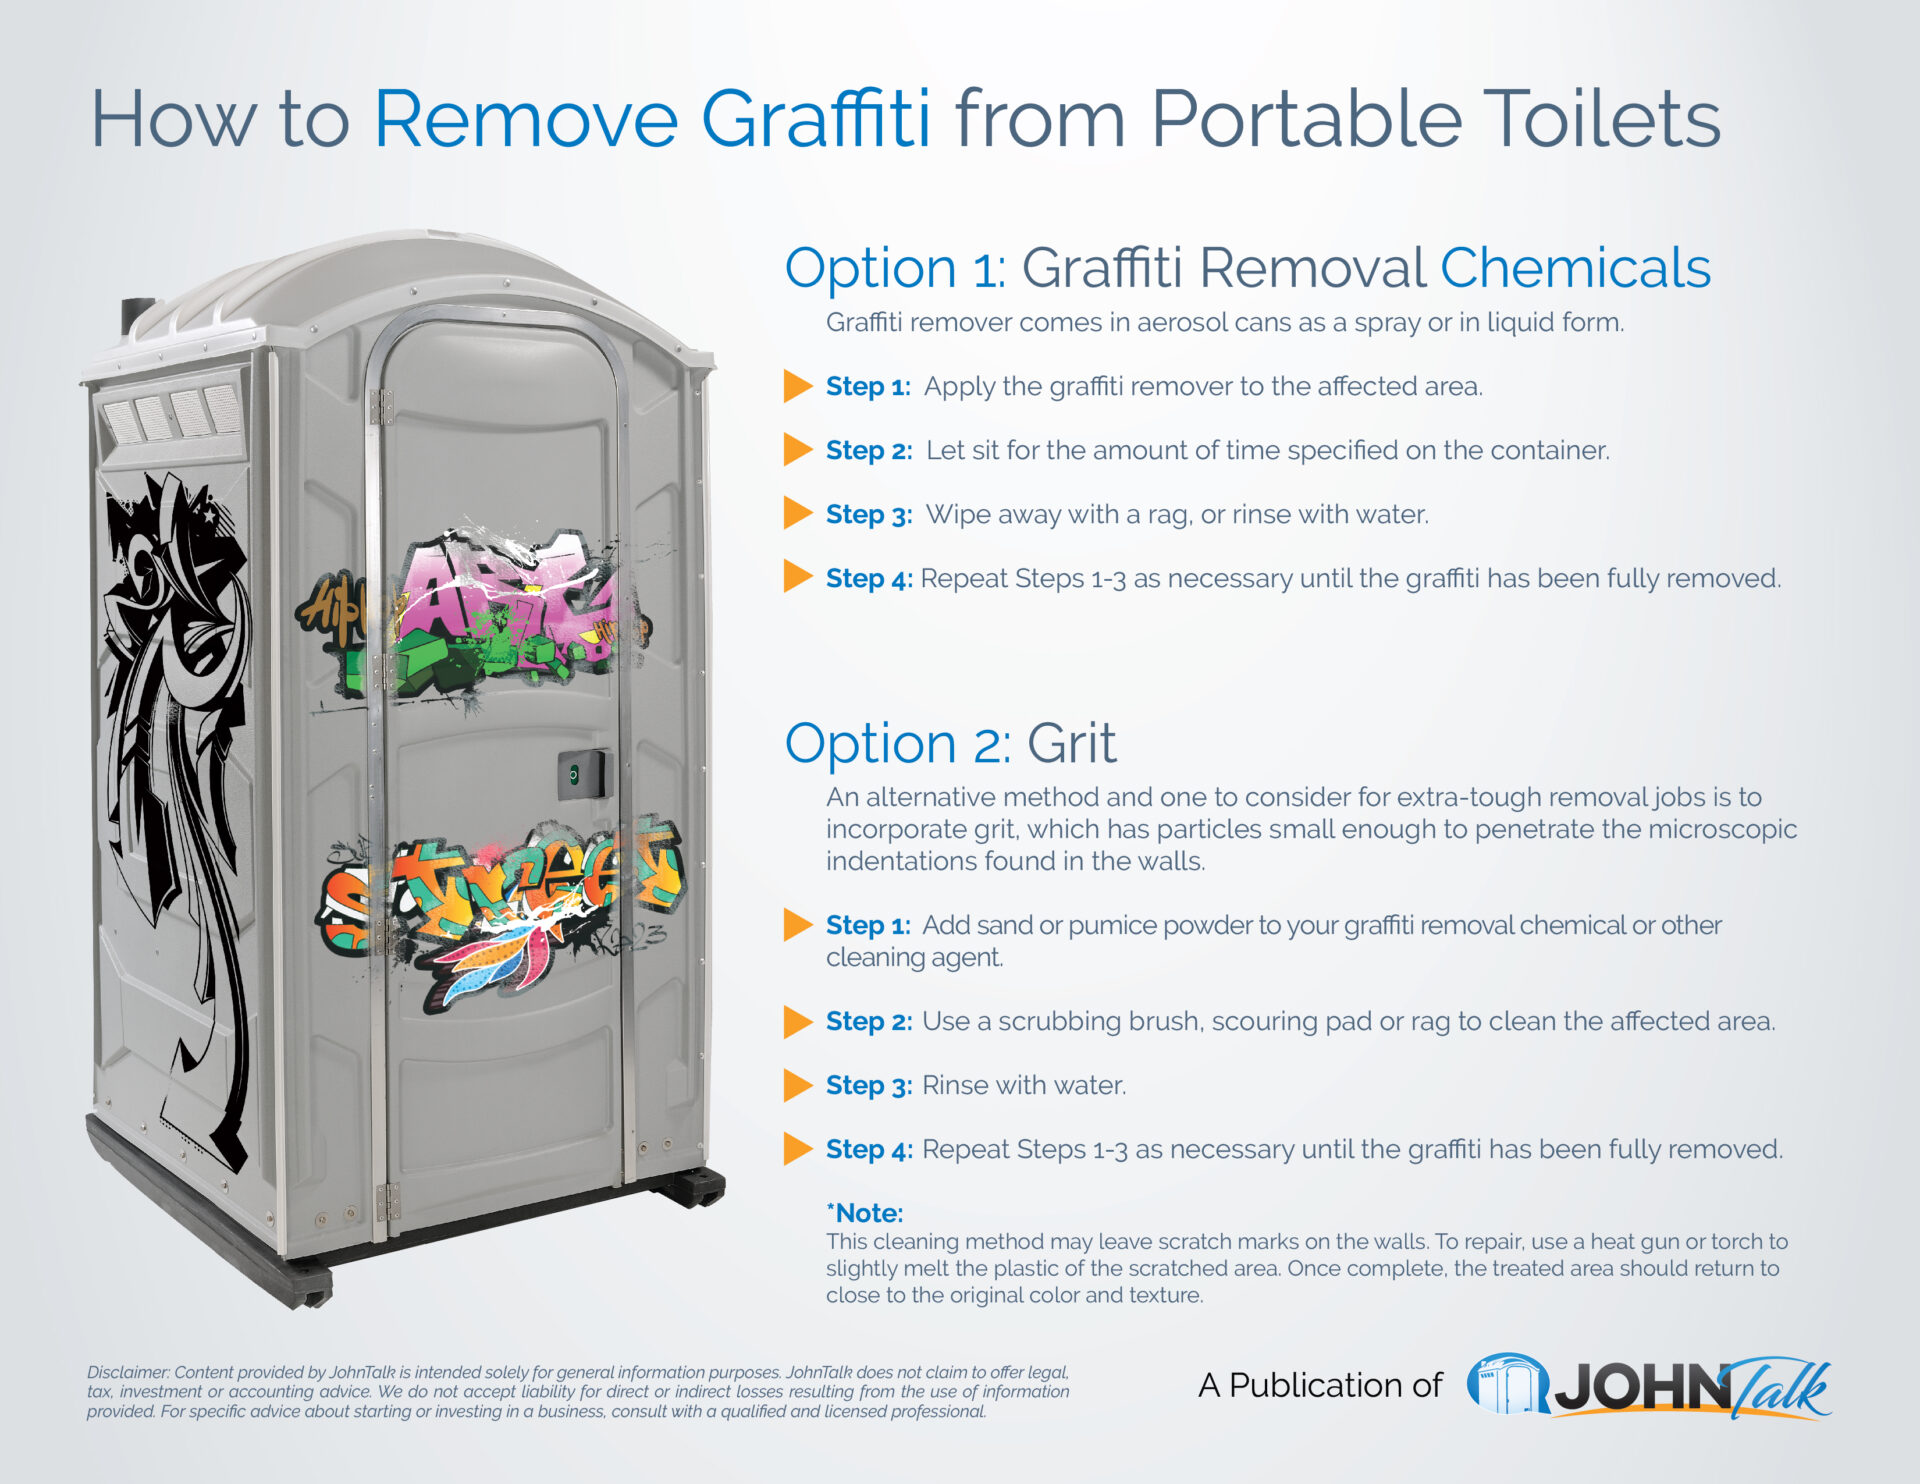 How to Remove Graffiti from Portable Toilets